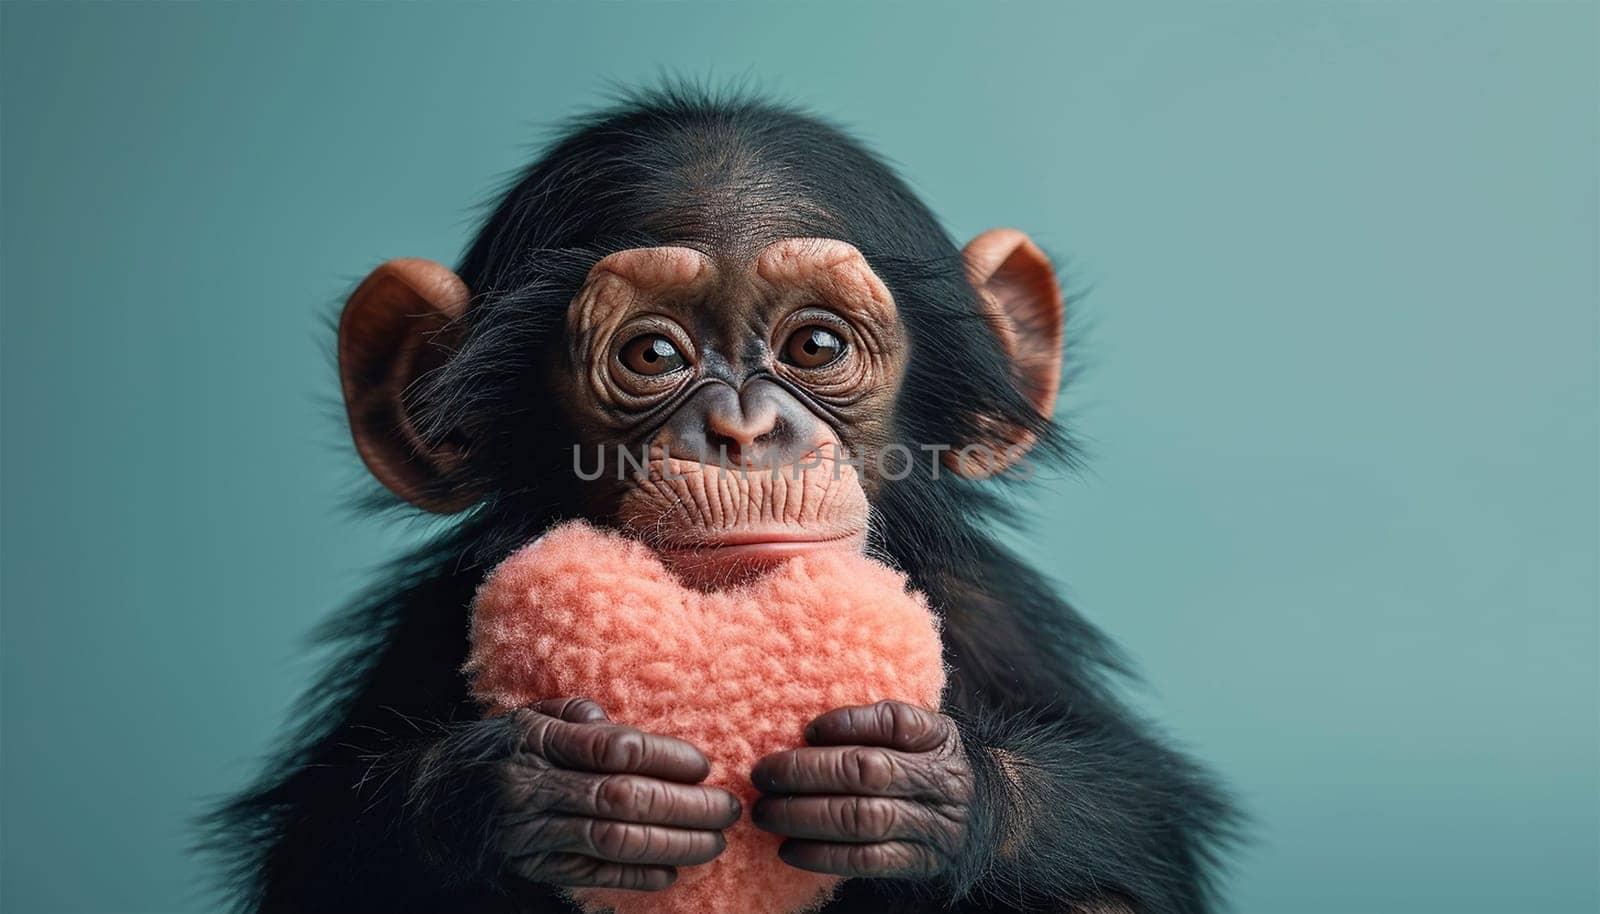 Valentine background Cute monkey chimpanzee holding red heart. Pastel green background. Happy monkey for St. Valentine's Day party. Happy Valentine's Day Love